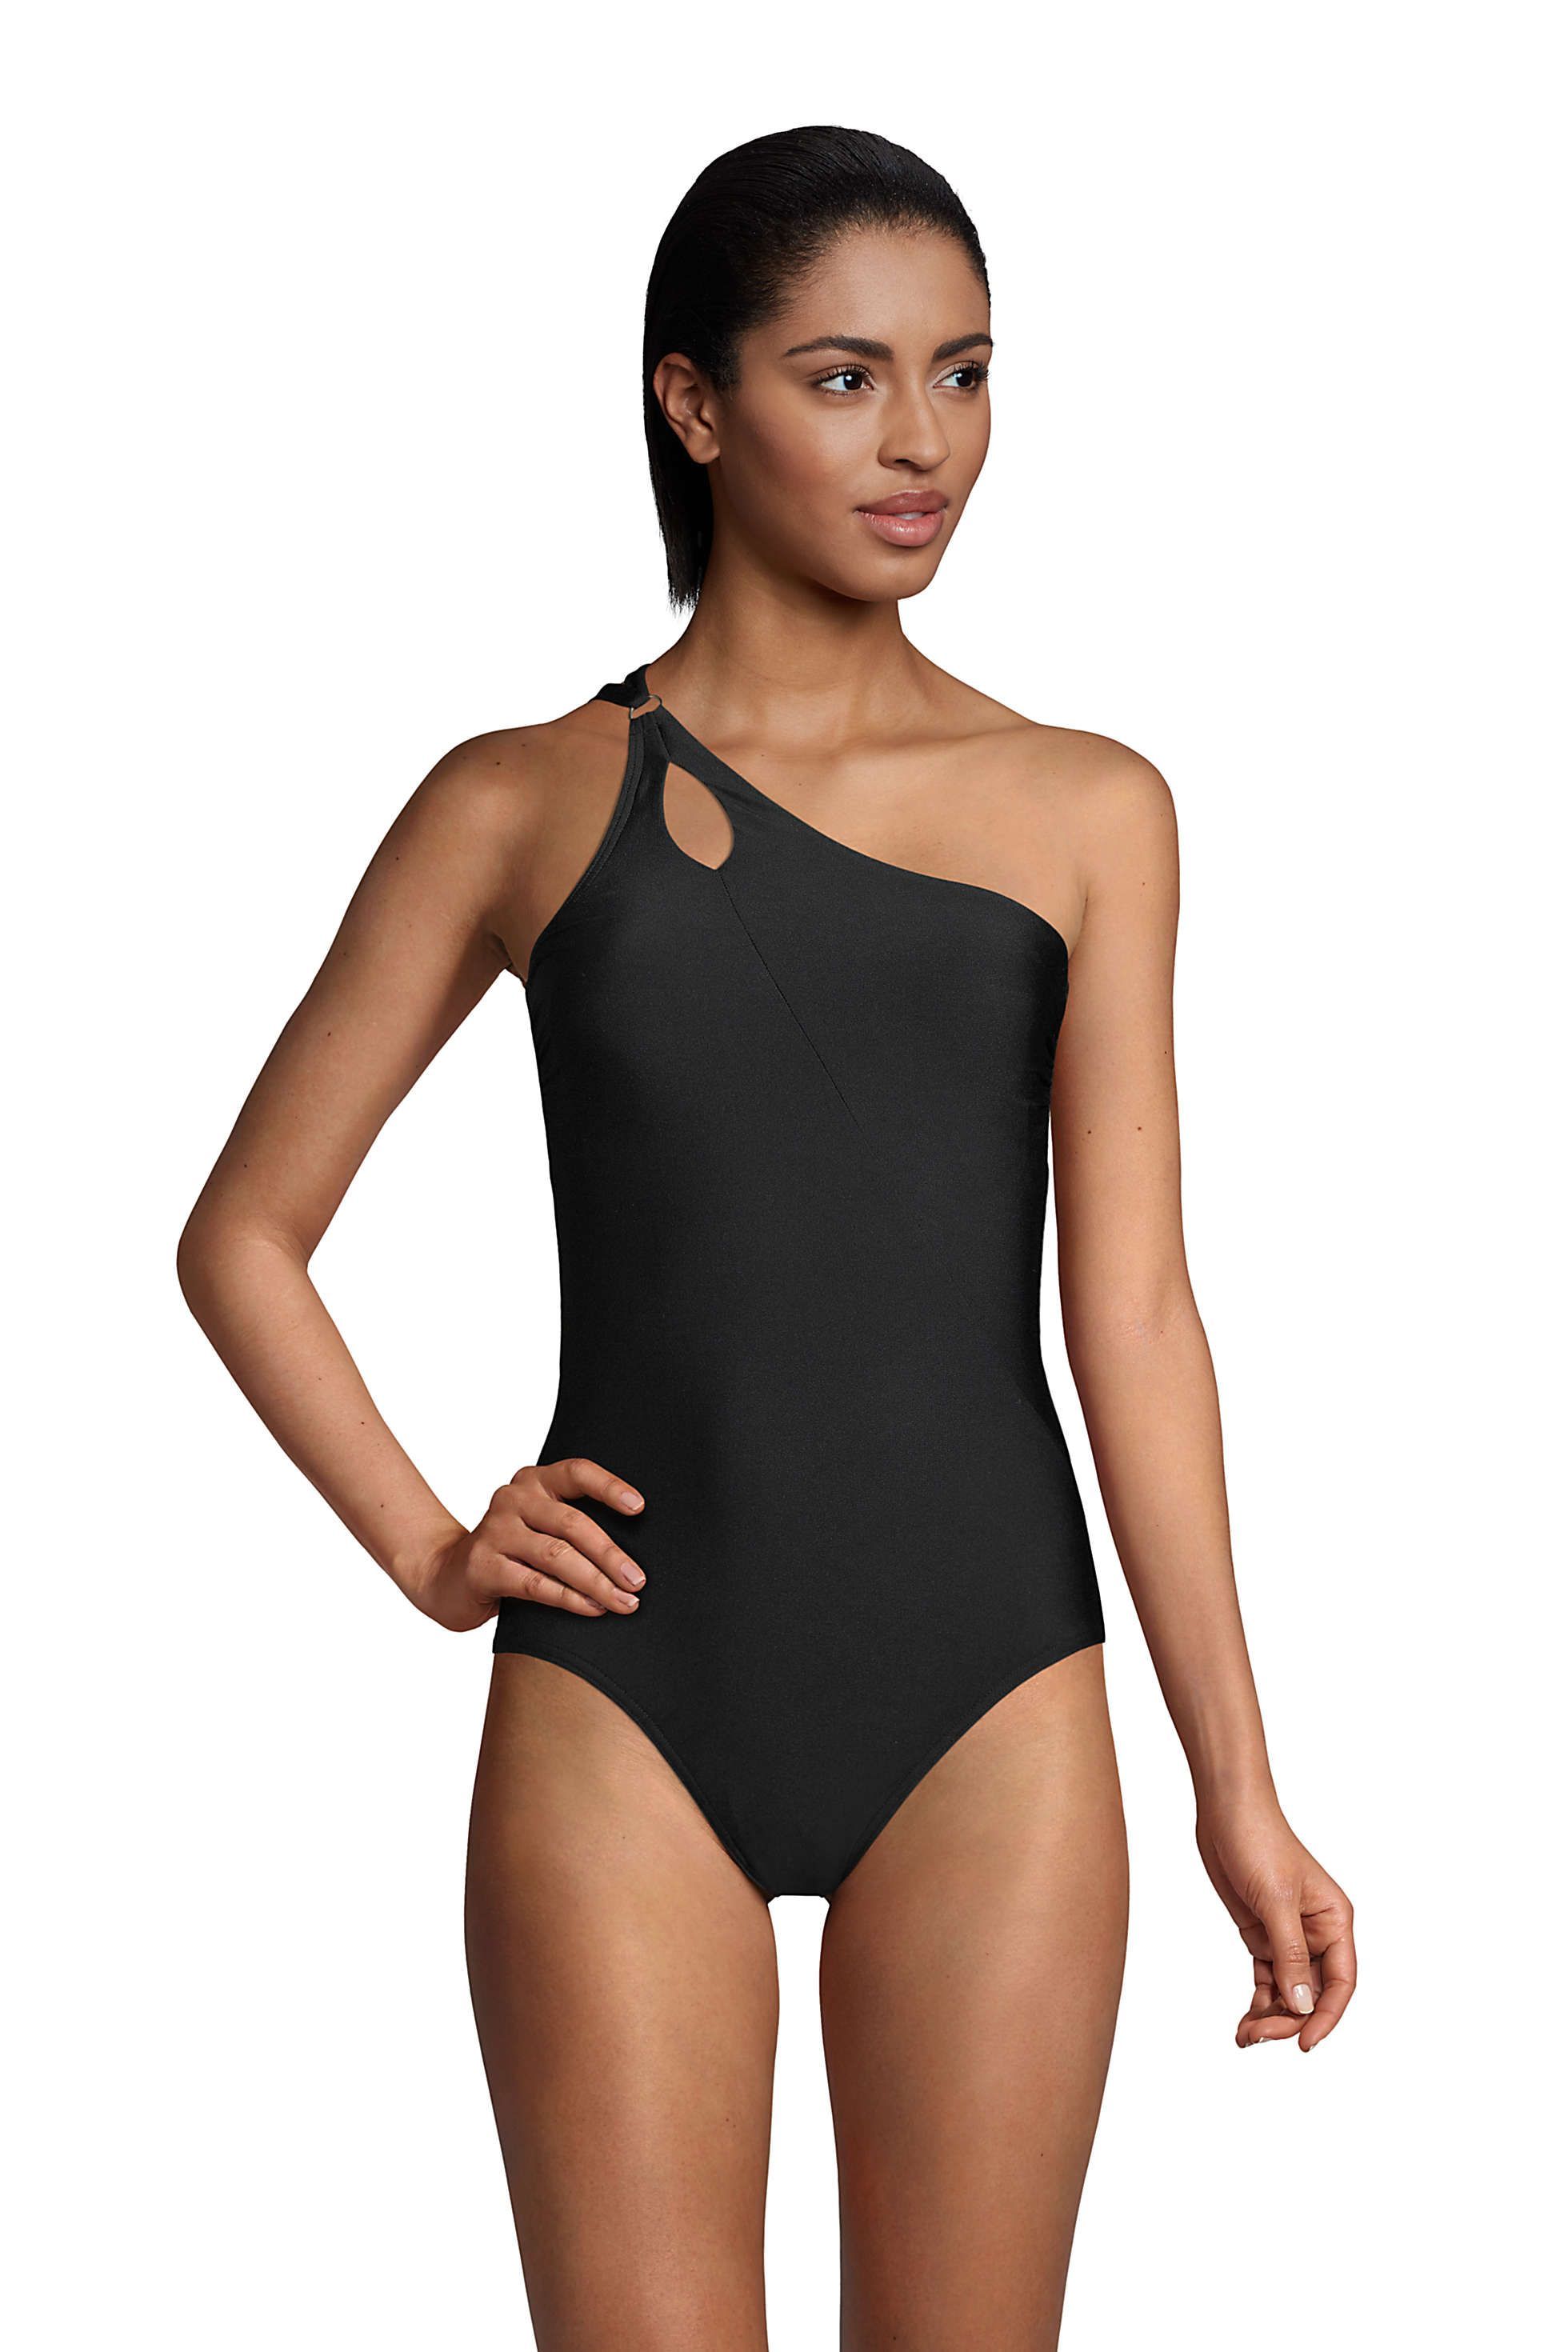 18 Best One Piece Swimsuits 2023 - Cute One-Piece Bathing Suits